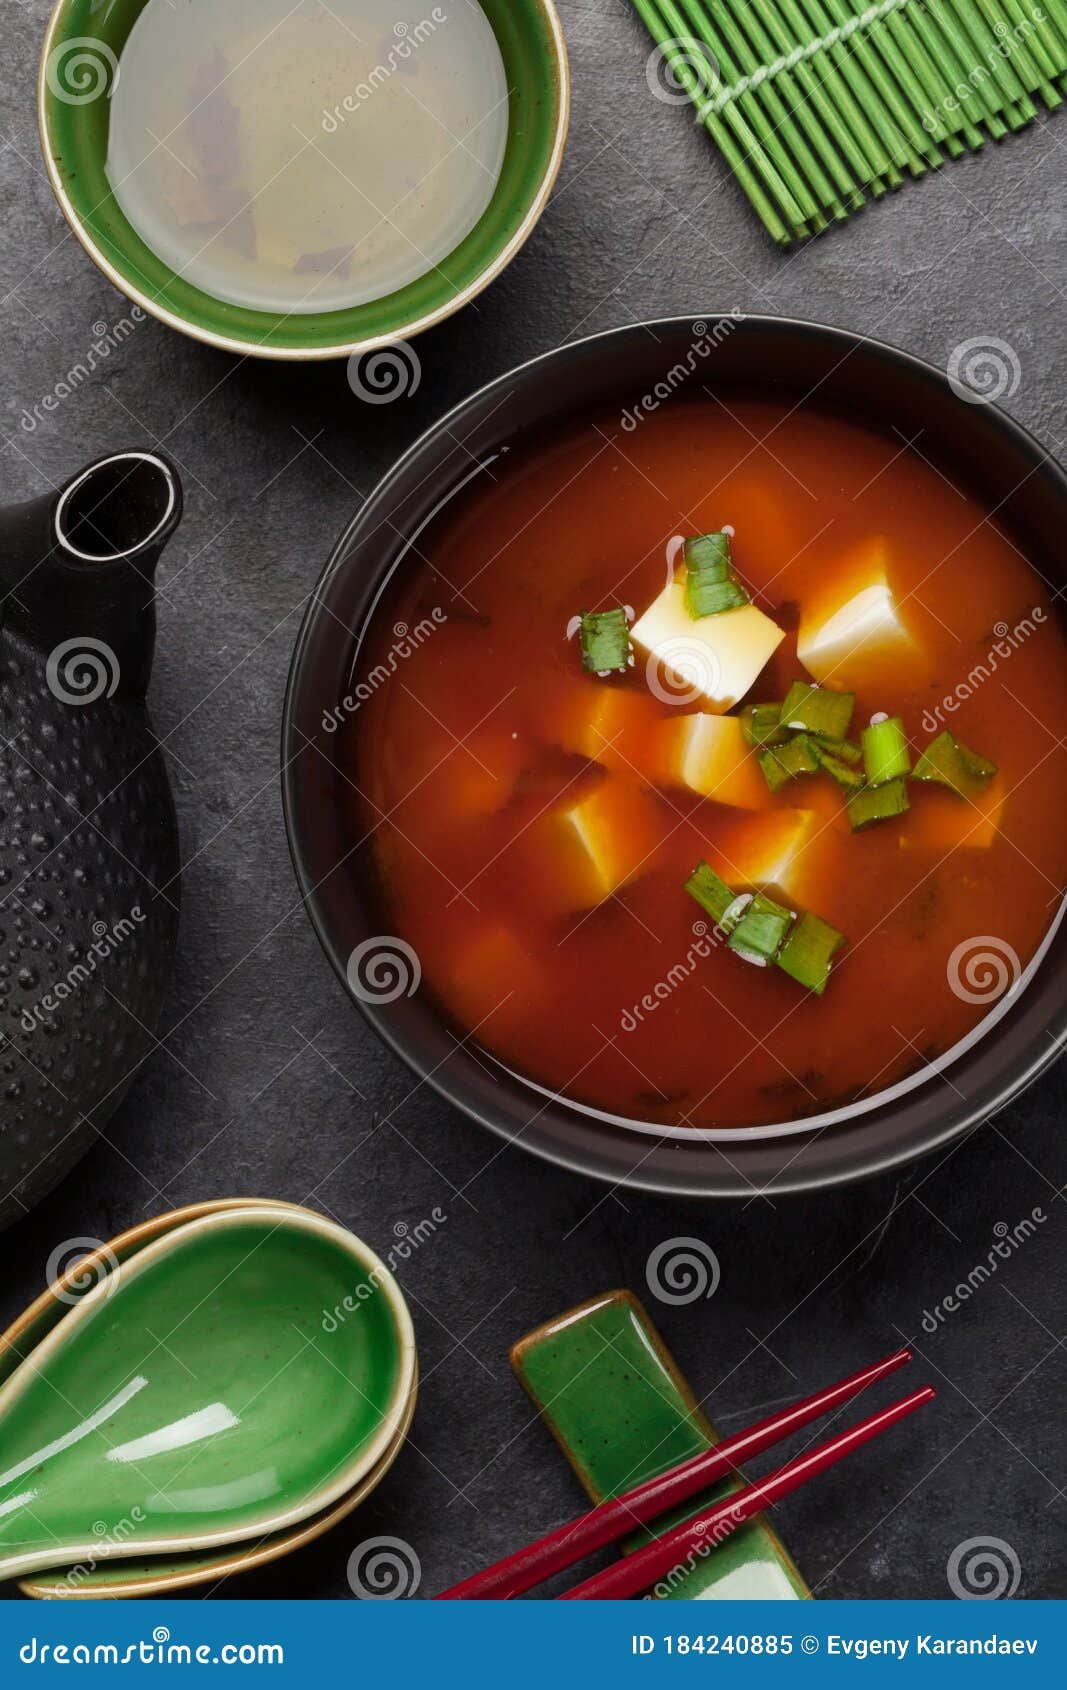 Miso Traditional Japanese Soup with Tofu Stock Image - Image of sauce ...